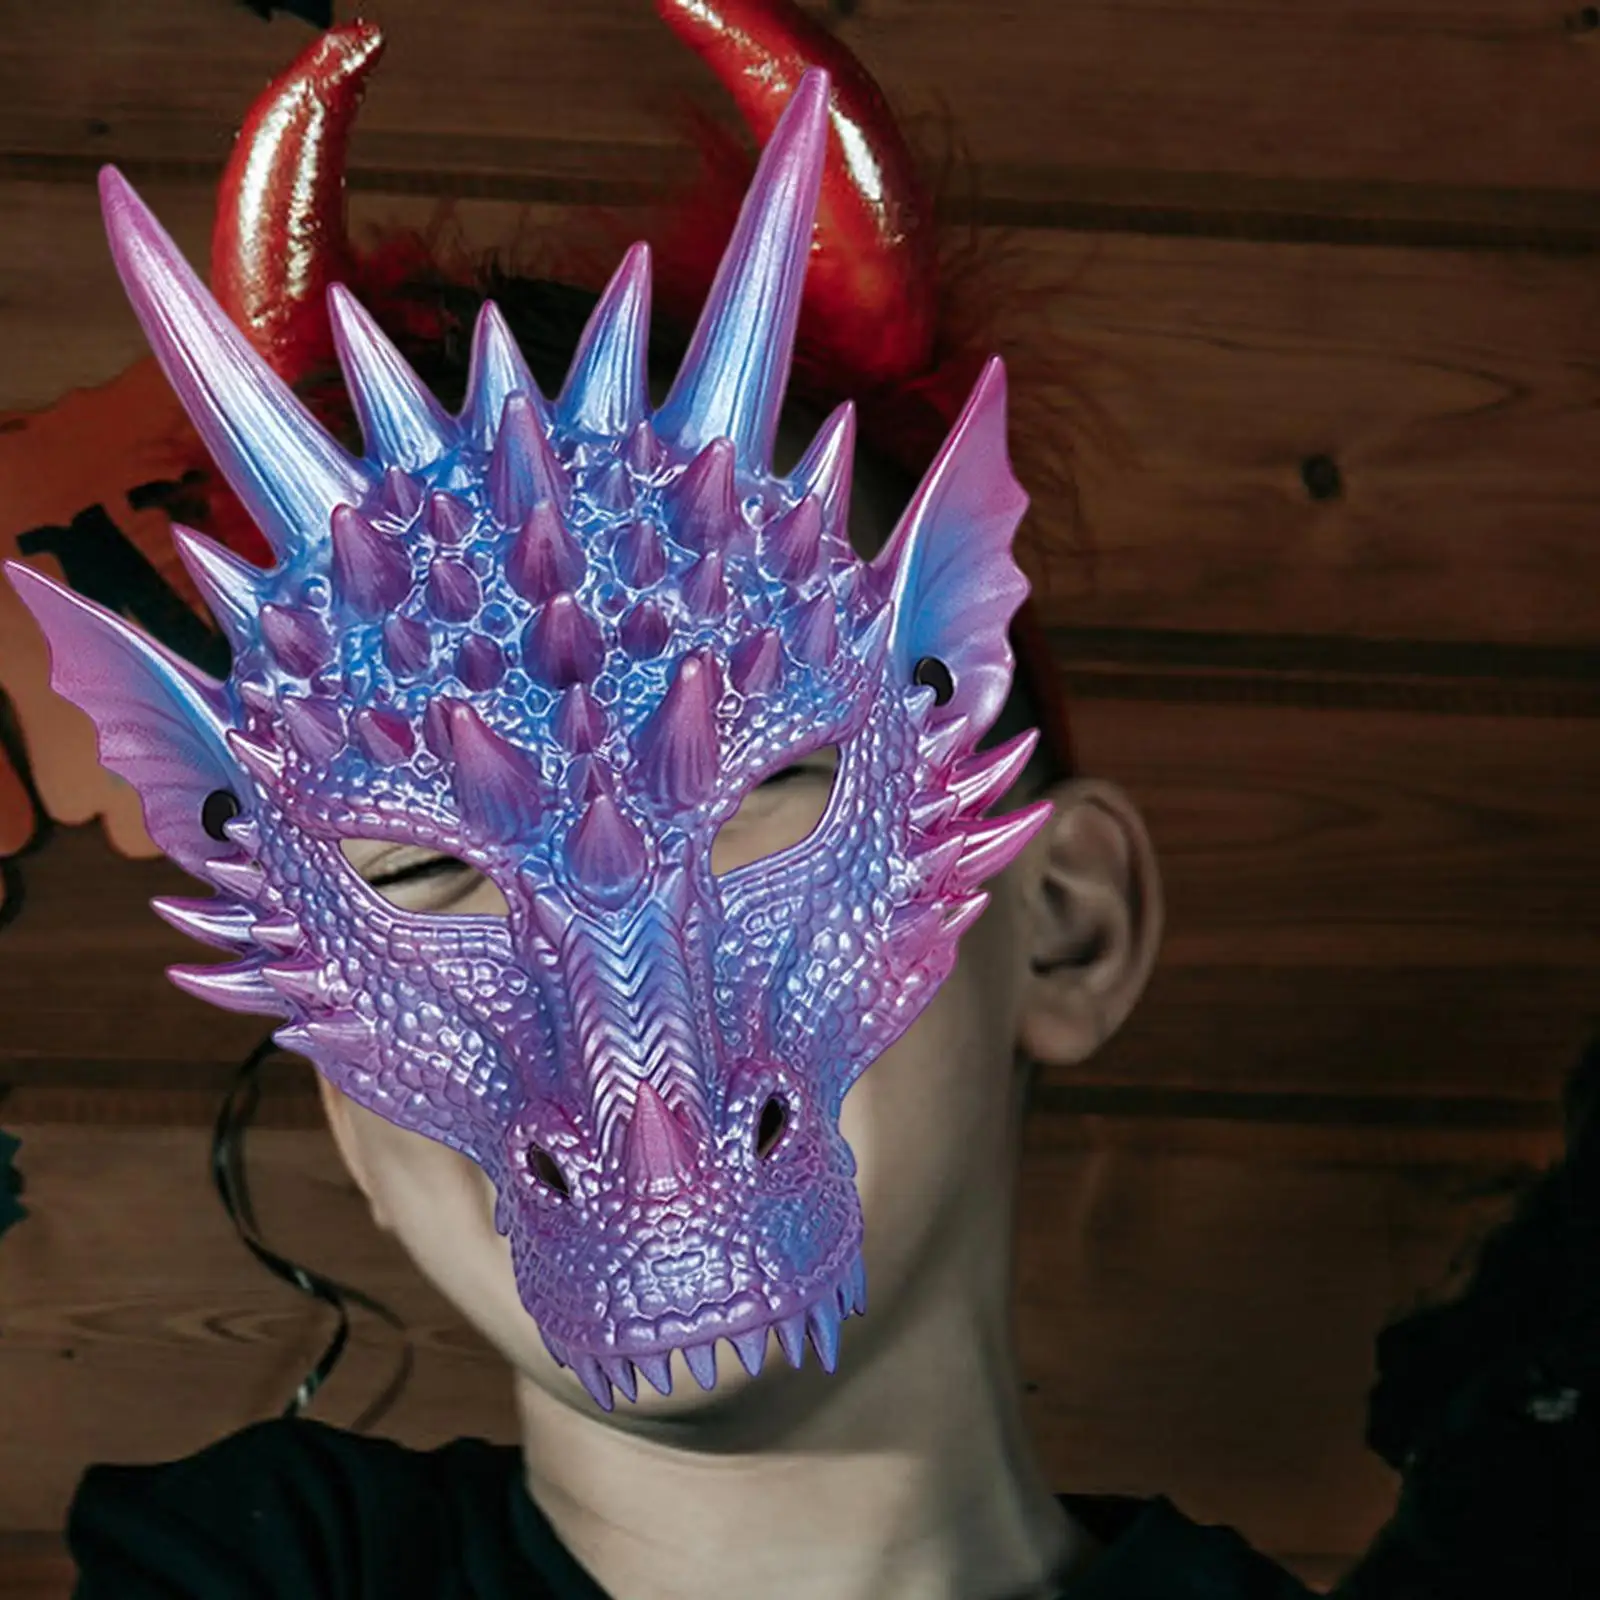 Dragon Cosplay Mask Realistic Full Head Cover Halloween Mask Scary Animal Mask for Costume Cosplay Party Halloween Masquerade